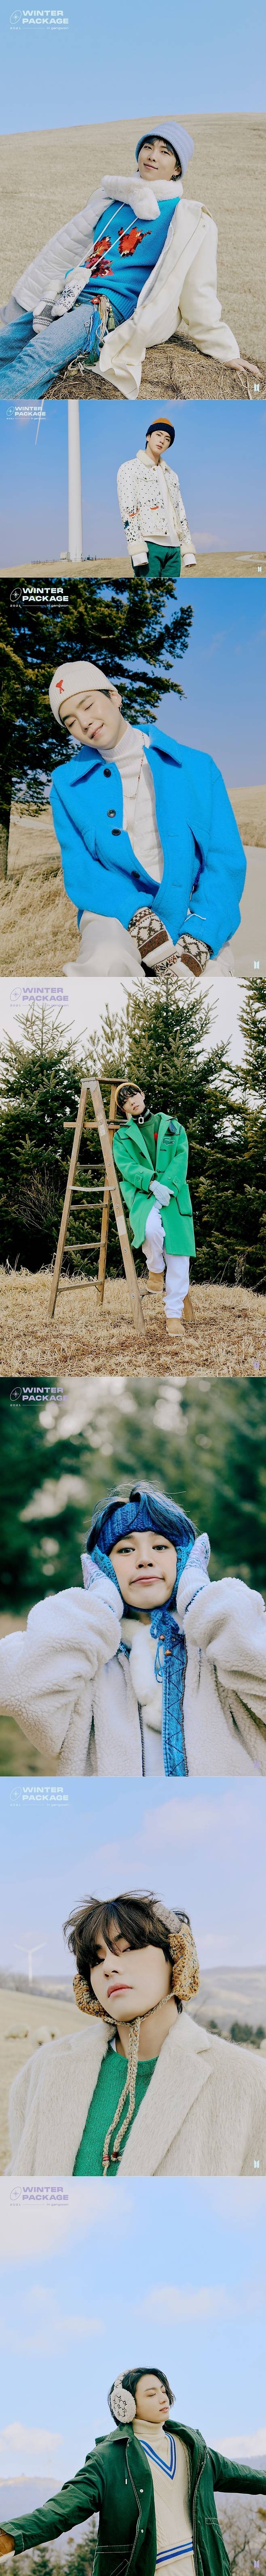 Winter Pictures of Group BTS (RM, Jean, Sugar, Jay Hop, Ji Min, V, Jungkook) have been released.BTS unveiled its 2021 BTS WINTER PACKAGE Preview Cuts (2021 Vitis Winter Package Brievue Cut) on the fan community platform Wiverse between January 27 and 28.The photo is a picture of Winter Package, which BTS officially releases on February 26th.BTS recently completed a Package shoot in Gangwon Province, the sea in South Korea and snowy areas.The Package will include photobooks filled with a seven-color, seven-color Winter Sensibility, as well as mini posters, photo cards, and handwritten message cards from members.Meanwhile, BTS won the top spot on domestic and overseas music charts with its album Deluxe Edition (BE) released last year and the title song Life Goes On (Life Goes On).In particular, it has re-emerged its strong global popularity by entering the United States of America Billboard main album chart Billboard 200 and the main single chart Hot 100 at the same time.BTS will release Essential Edition (BE) on the 19th of next month.